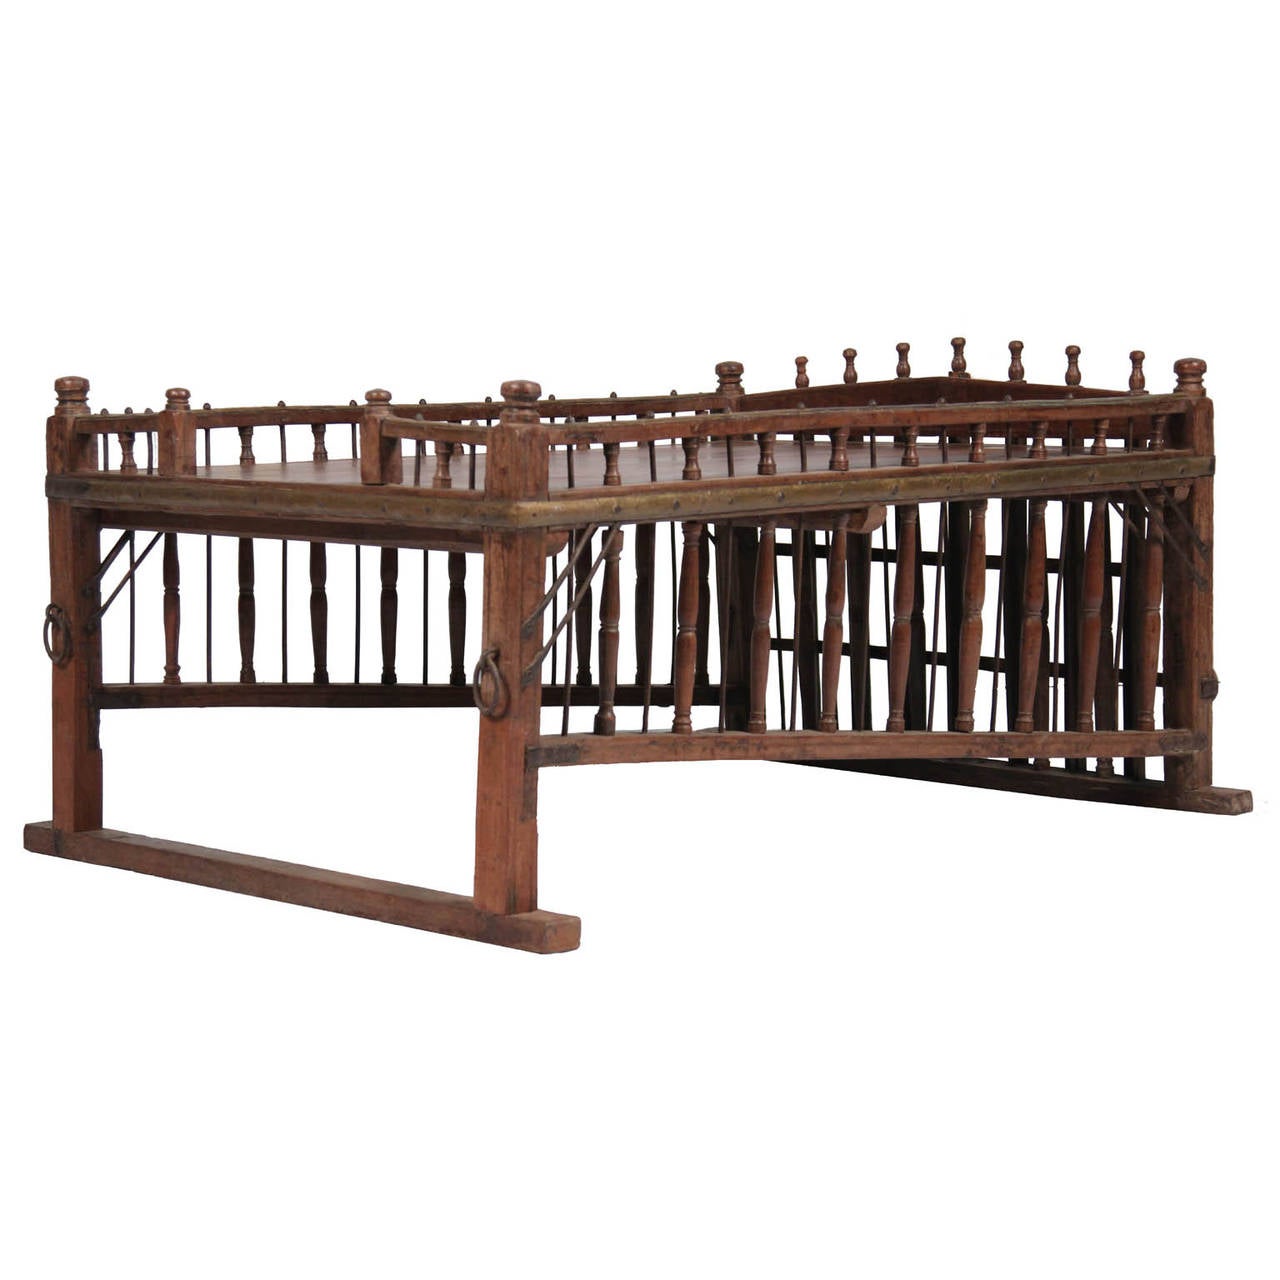 I bought this beautiful daybed from an antique dealer in southern India. One of a kind vintage bed with original wood, brass and iron hardware, would be a center of attention in your living room as a coffee table loaded with lots of books and